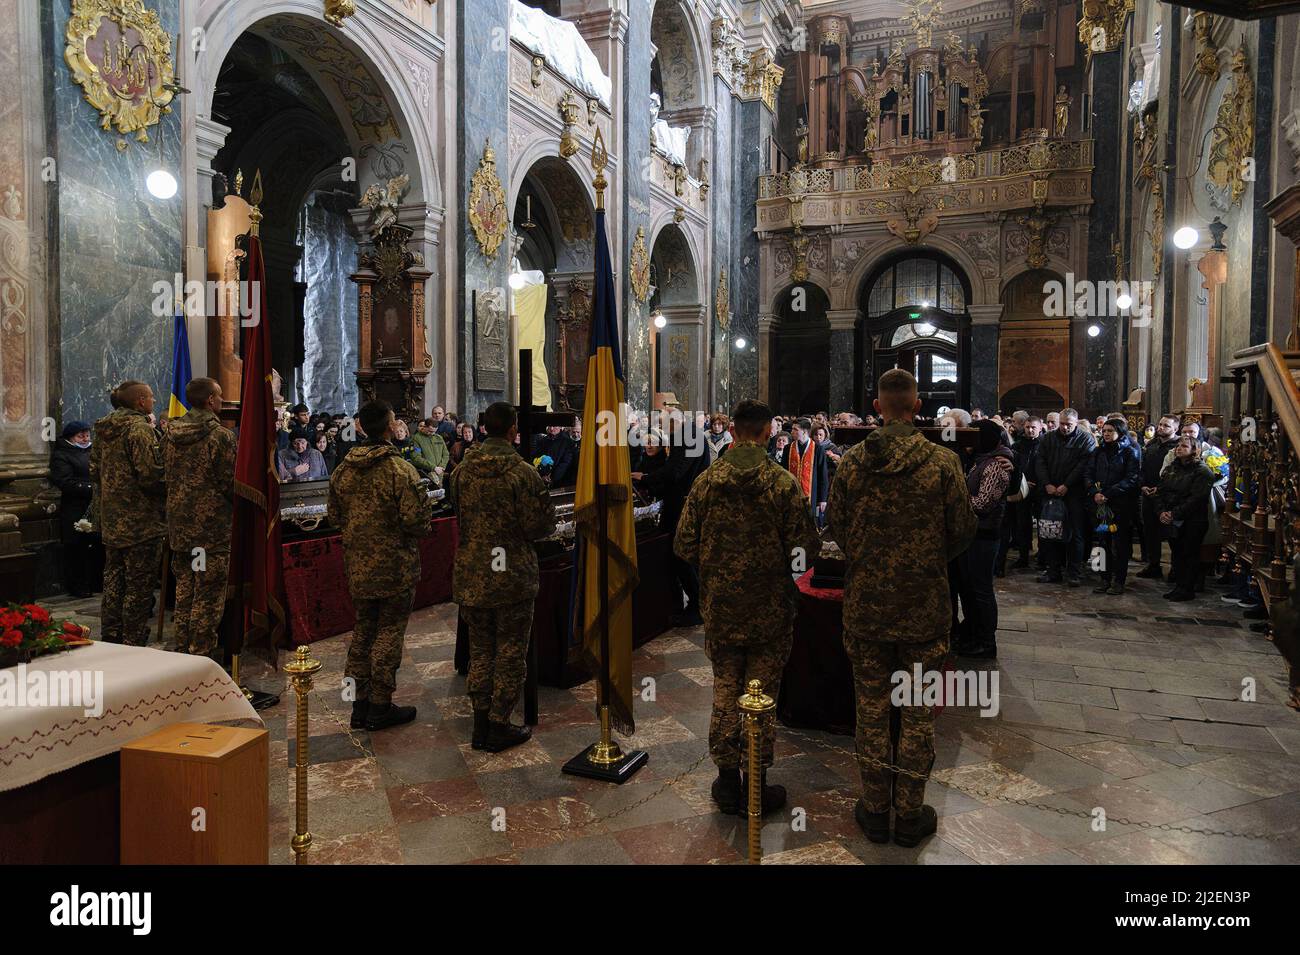 Lviv, Ukraine. 31st Mar, 2022. Ukrainian servicemen pay their respect to their comrades during the burial. Funeral ceremony of 3 Ukrainian soldiers Kozachenko Andriy, Sarkisyan Ihor, Oliynyk Yuriy killed by Russian forces amid the Russian invasion in Lviv. (Photo by Mykola Tys/SOPA Images/Sipa USA) Credit: Sipa USA/Alamy Live News Stock Photo